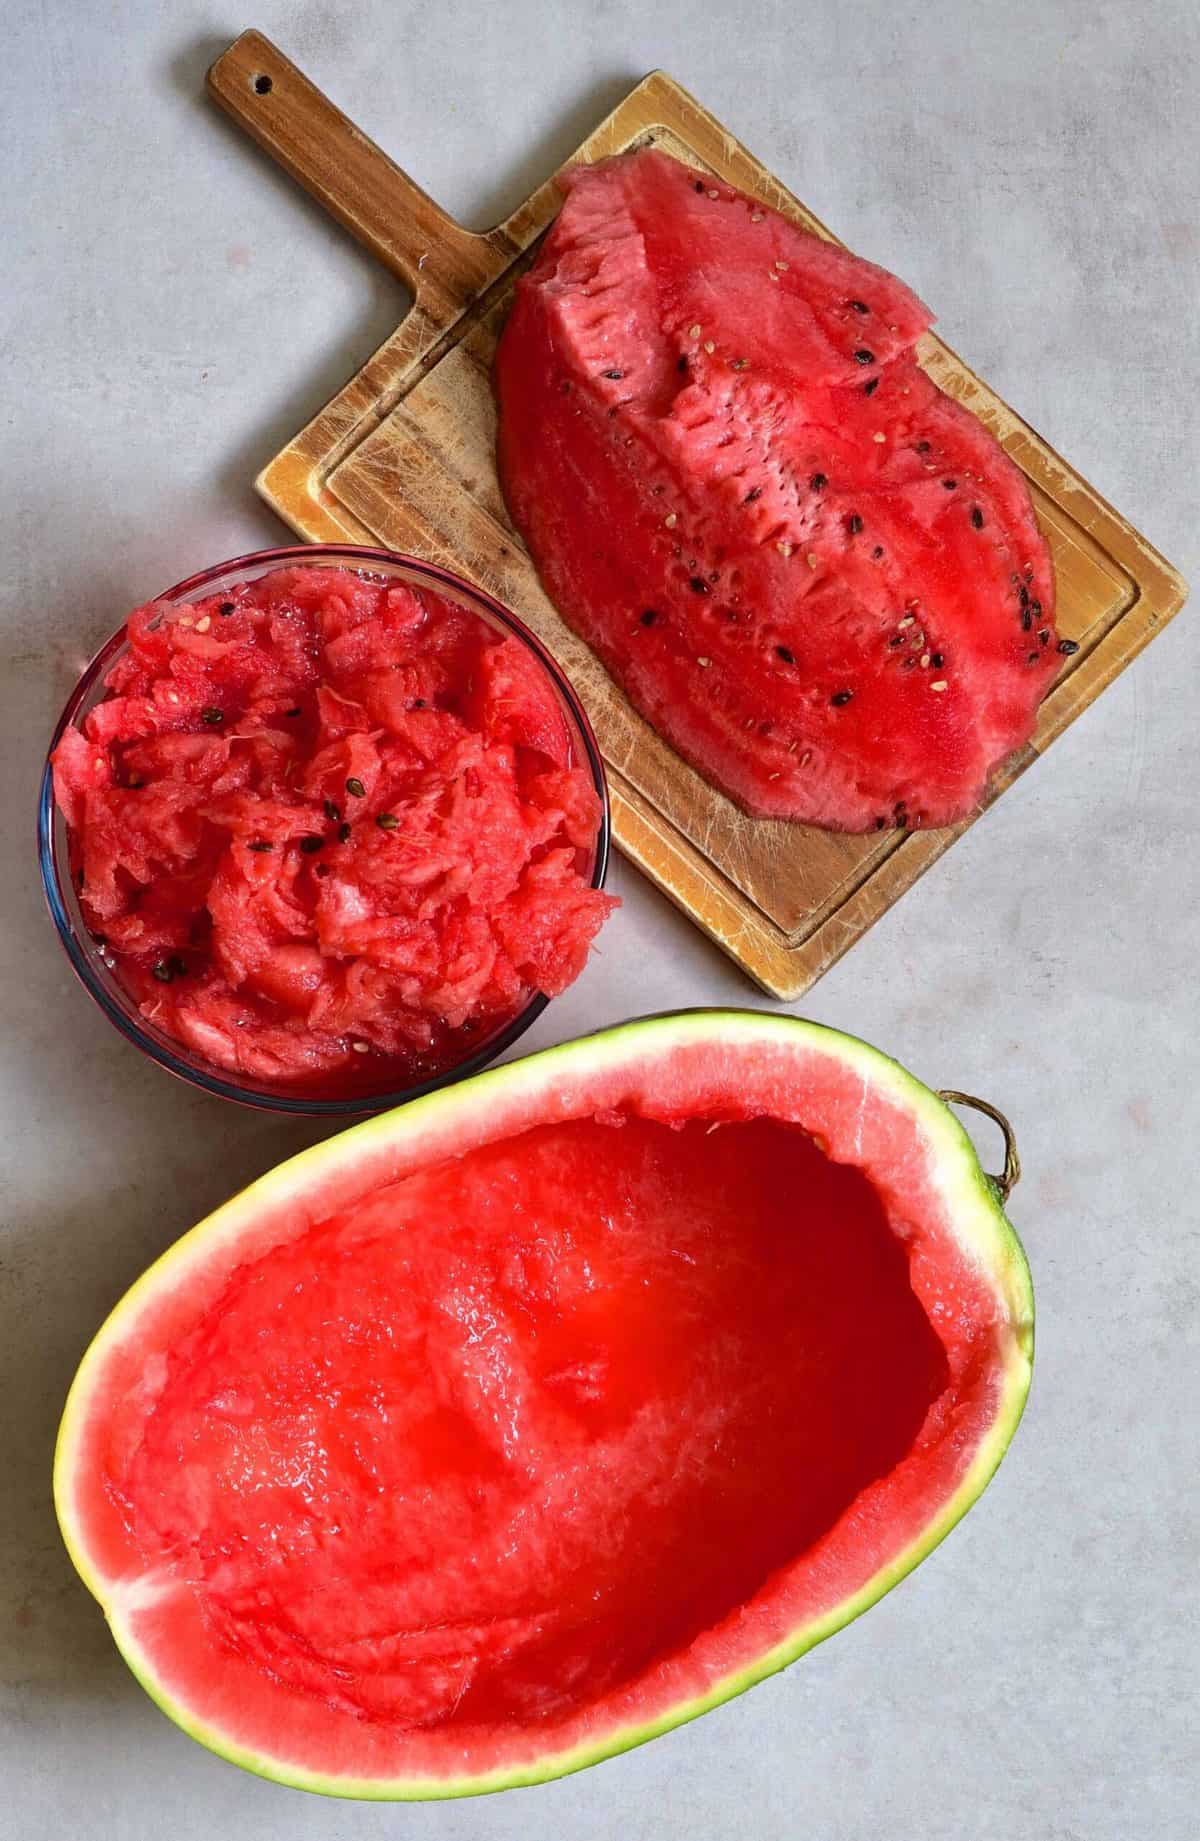 Watermelon flesh removed from watermelon